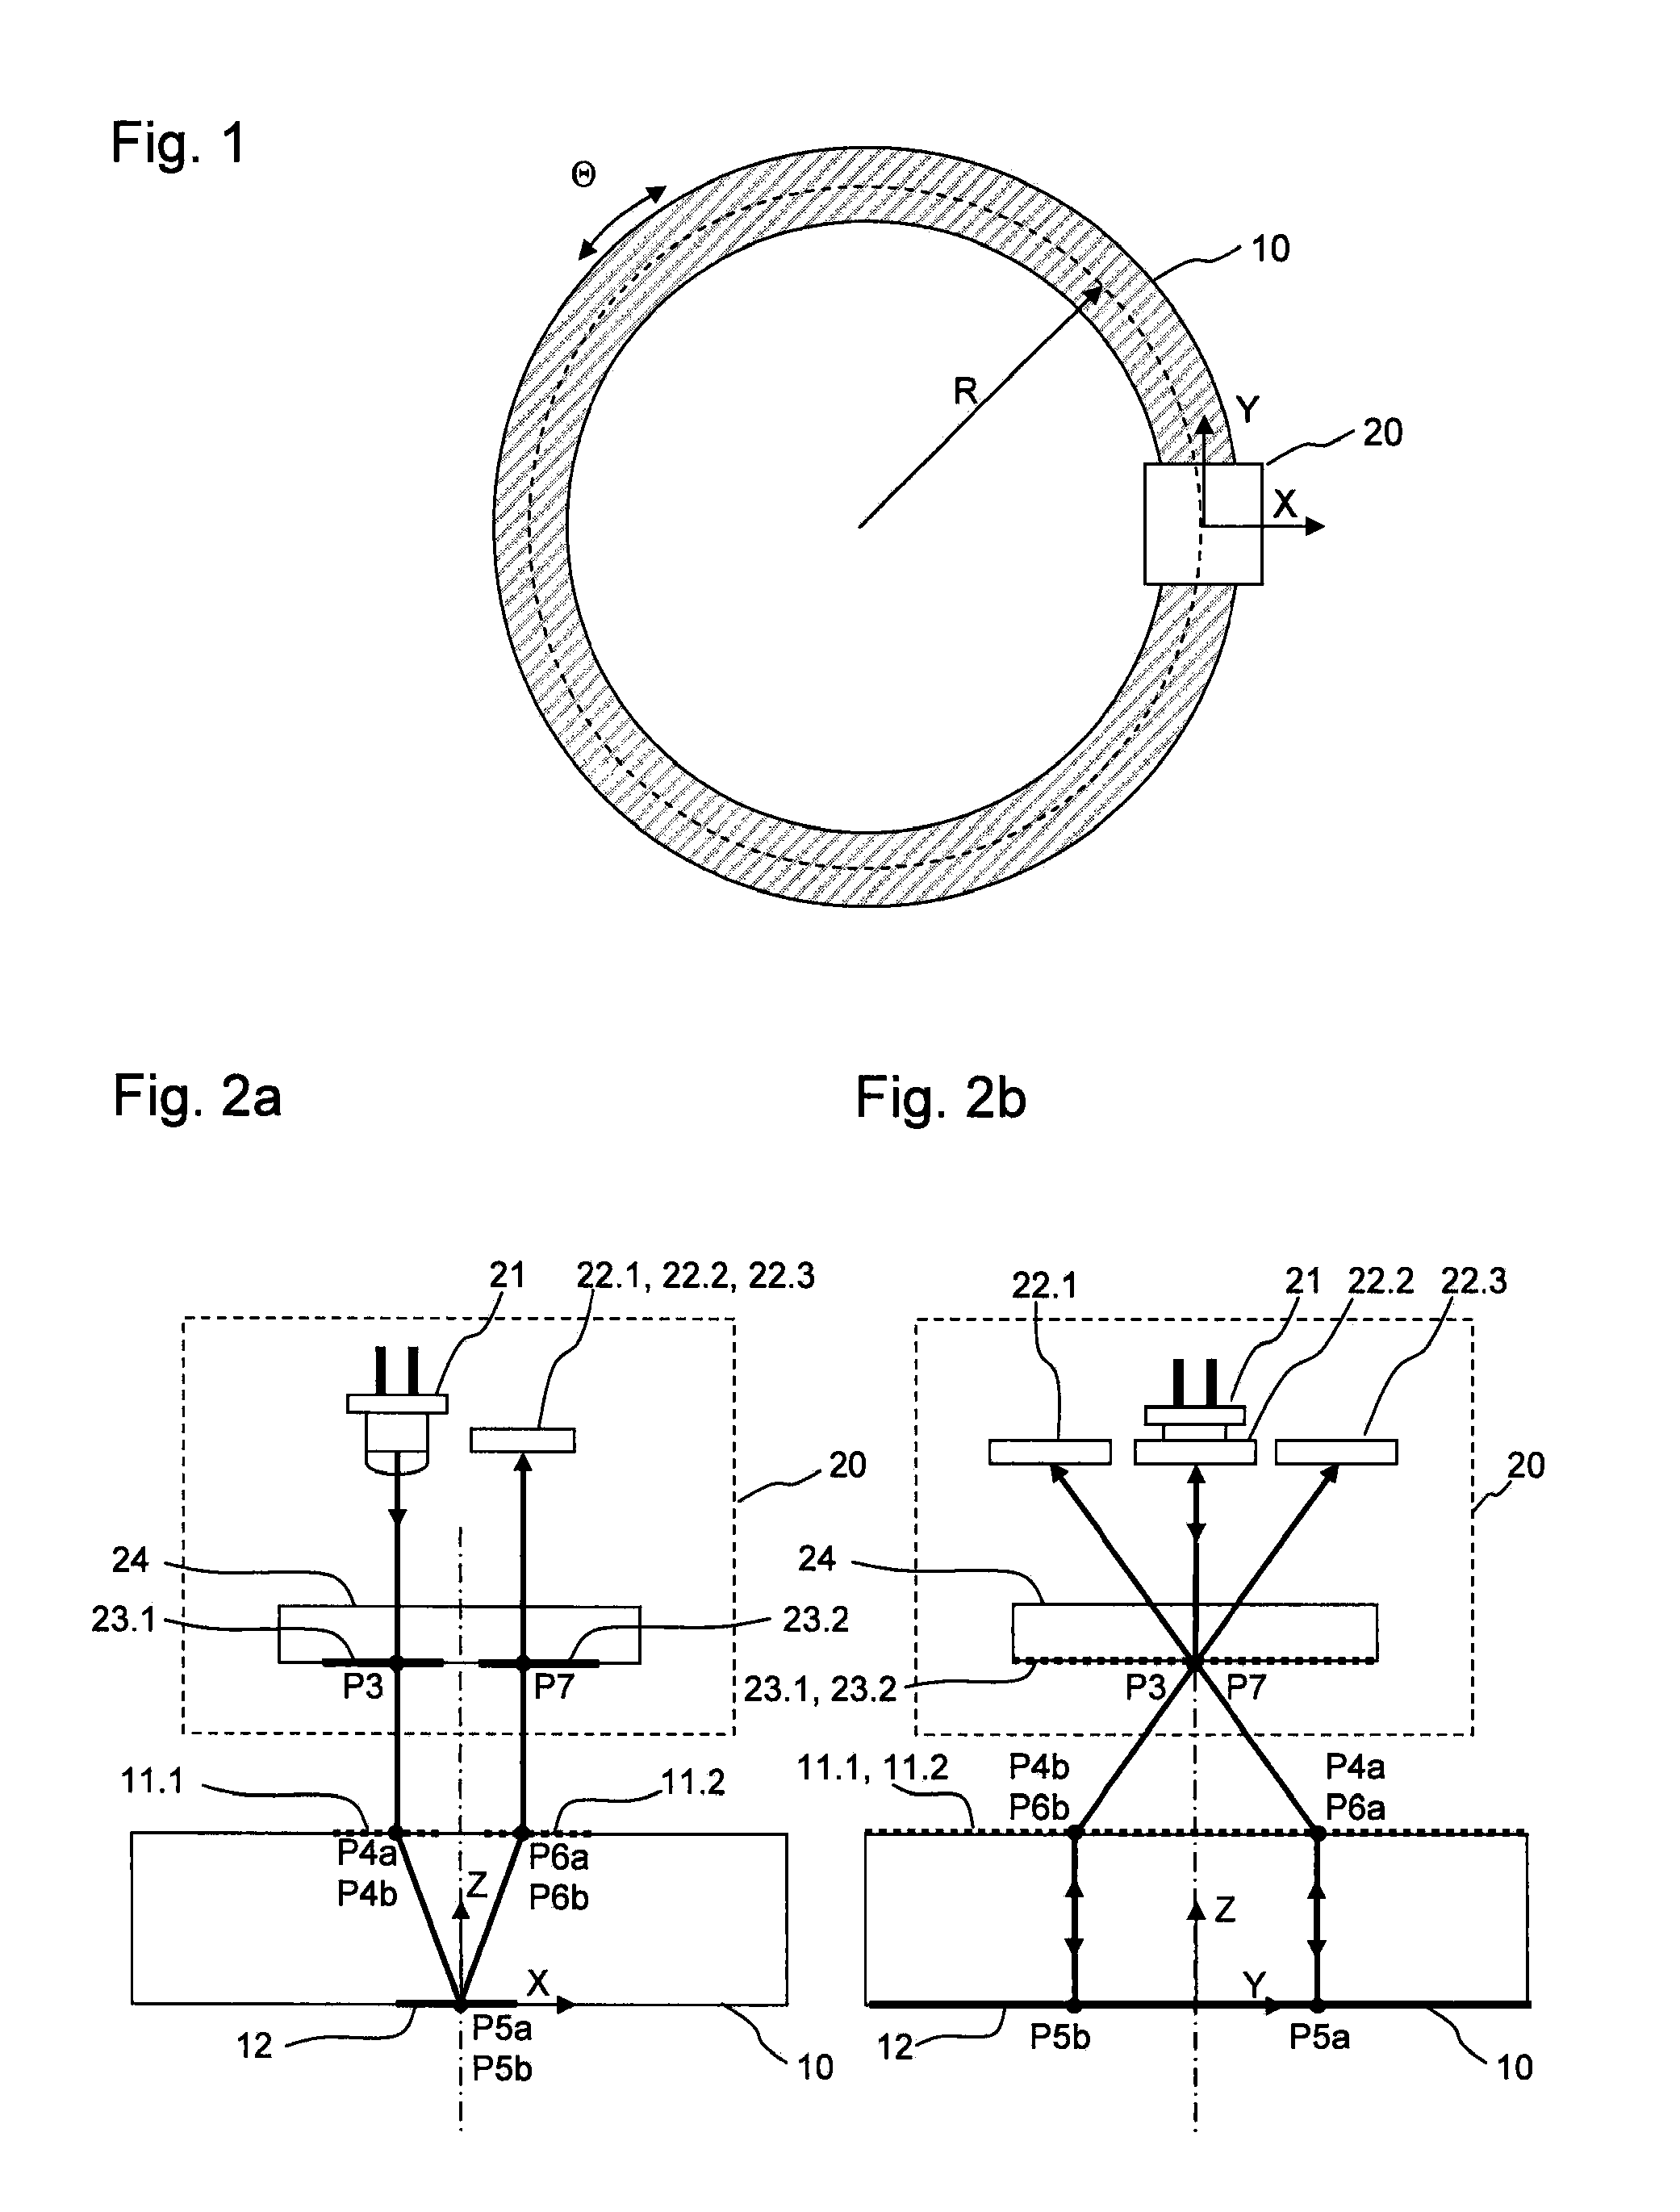 Optical angle-measuring device with combined radial-circular grating